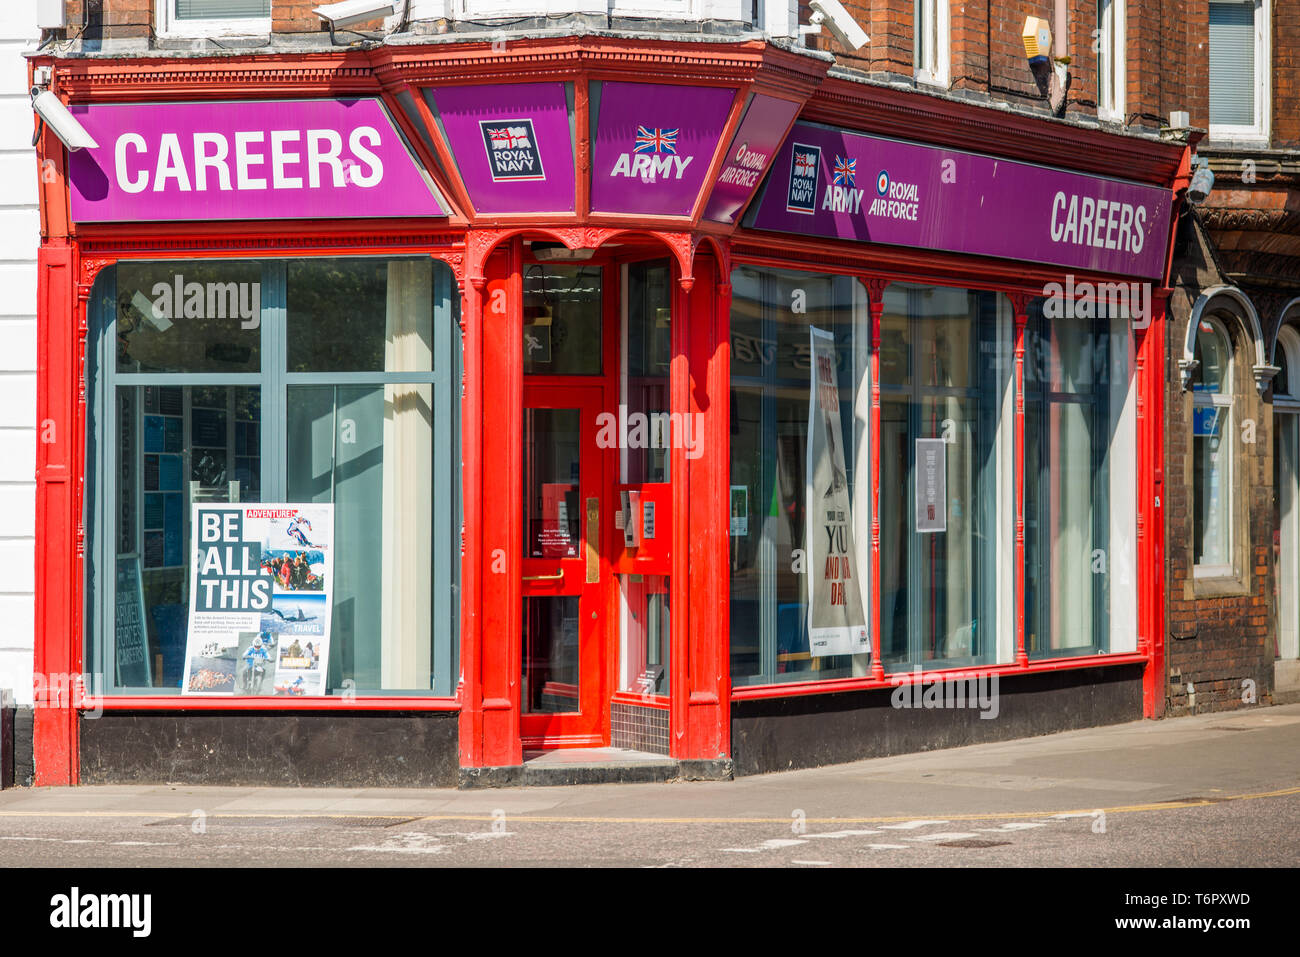 Armed forces recruitment office in Norwich, Norfolk, East Anglia, UK. Stock Photo